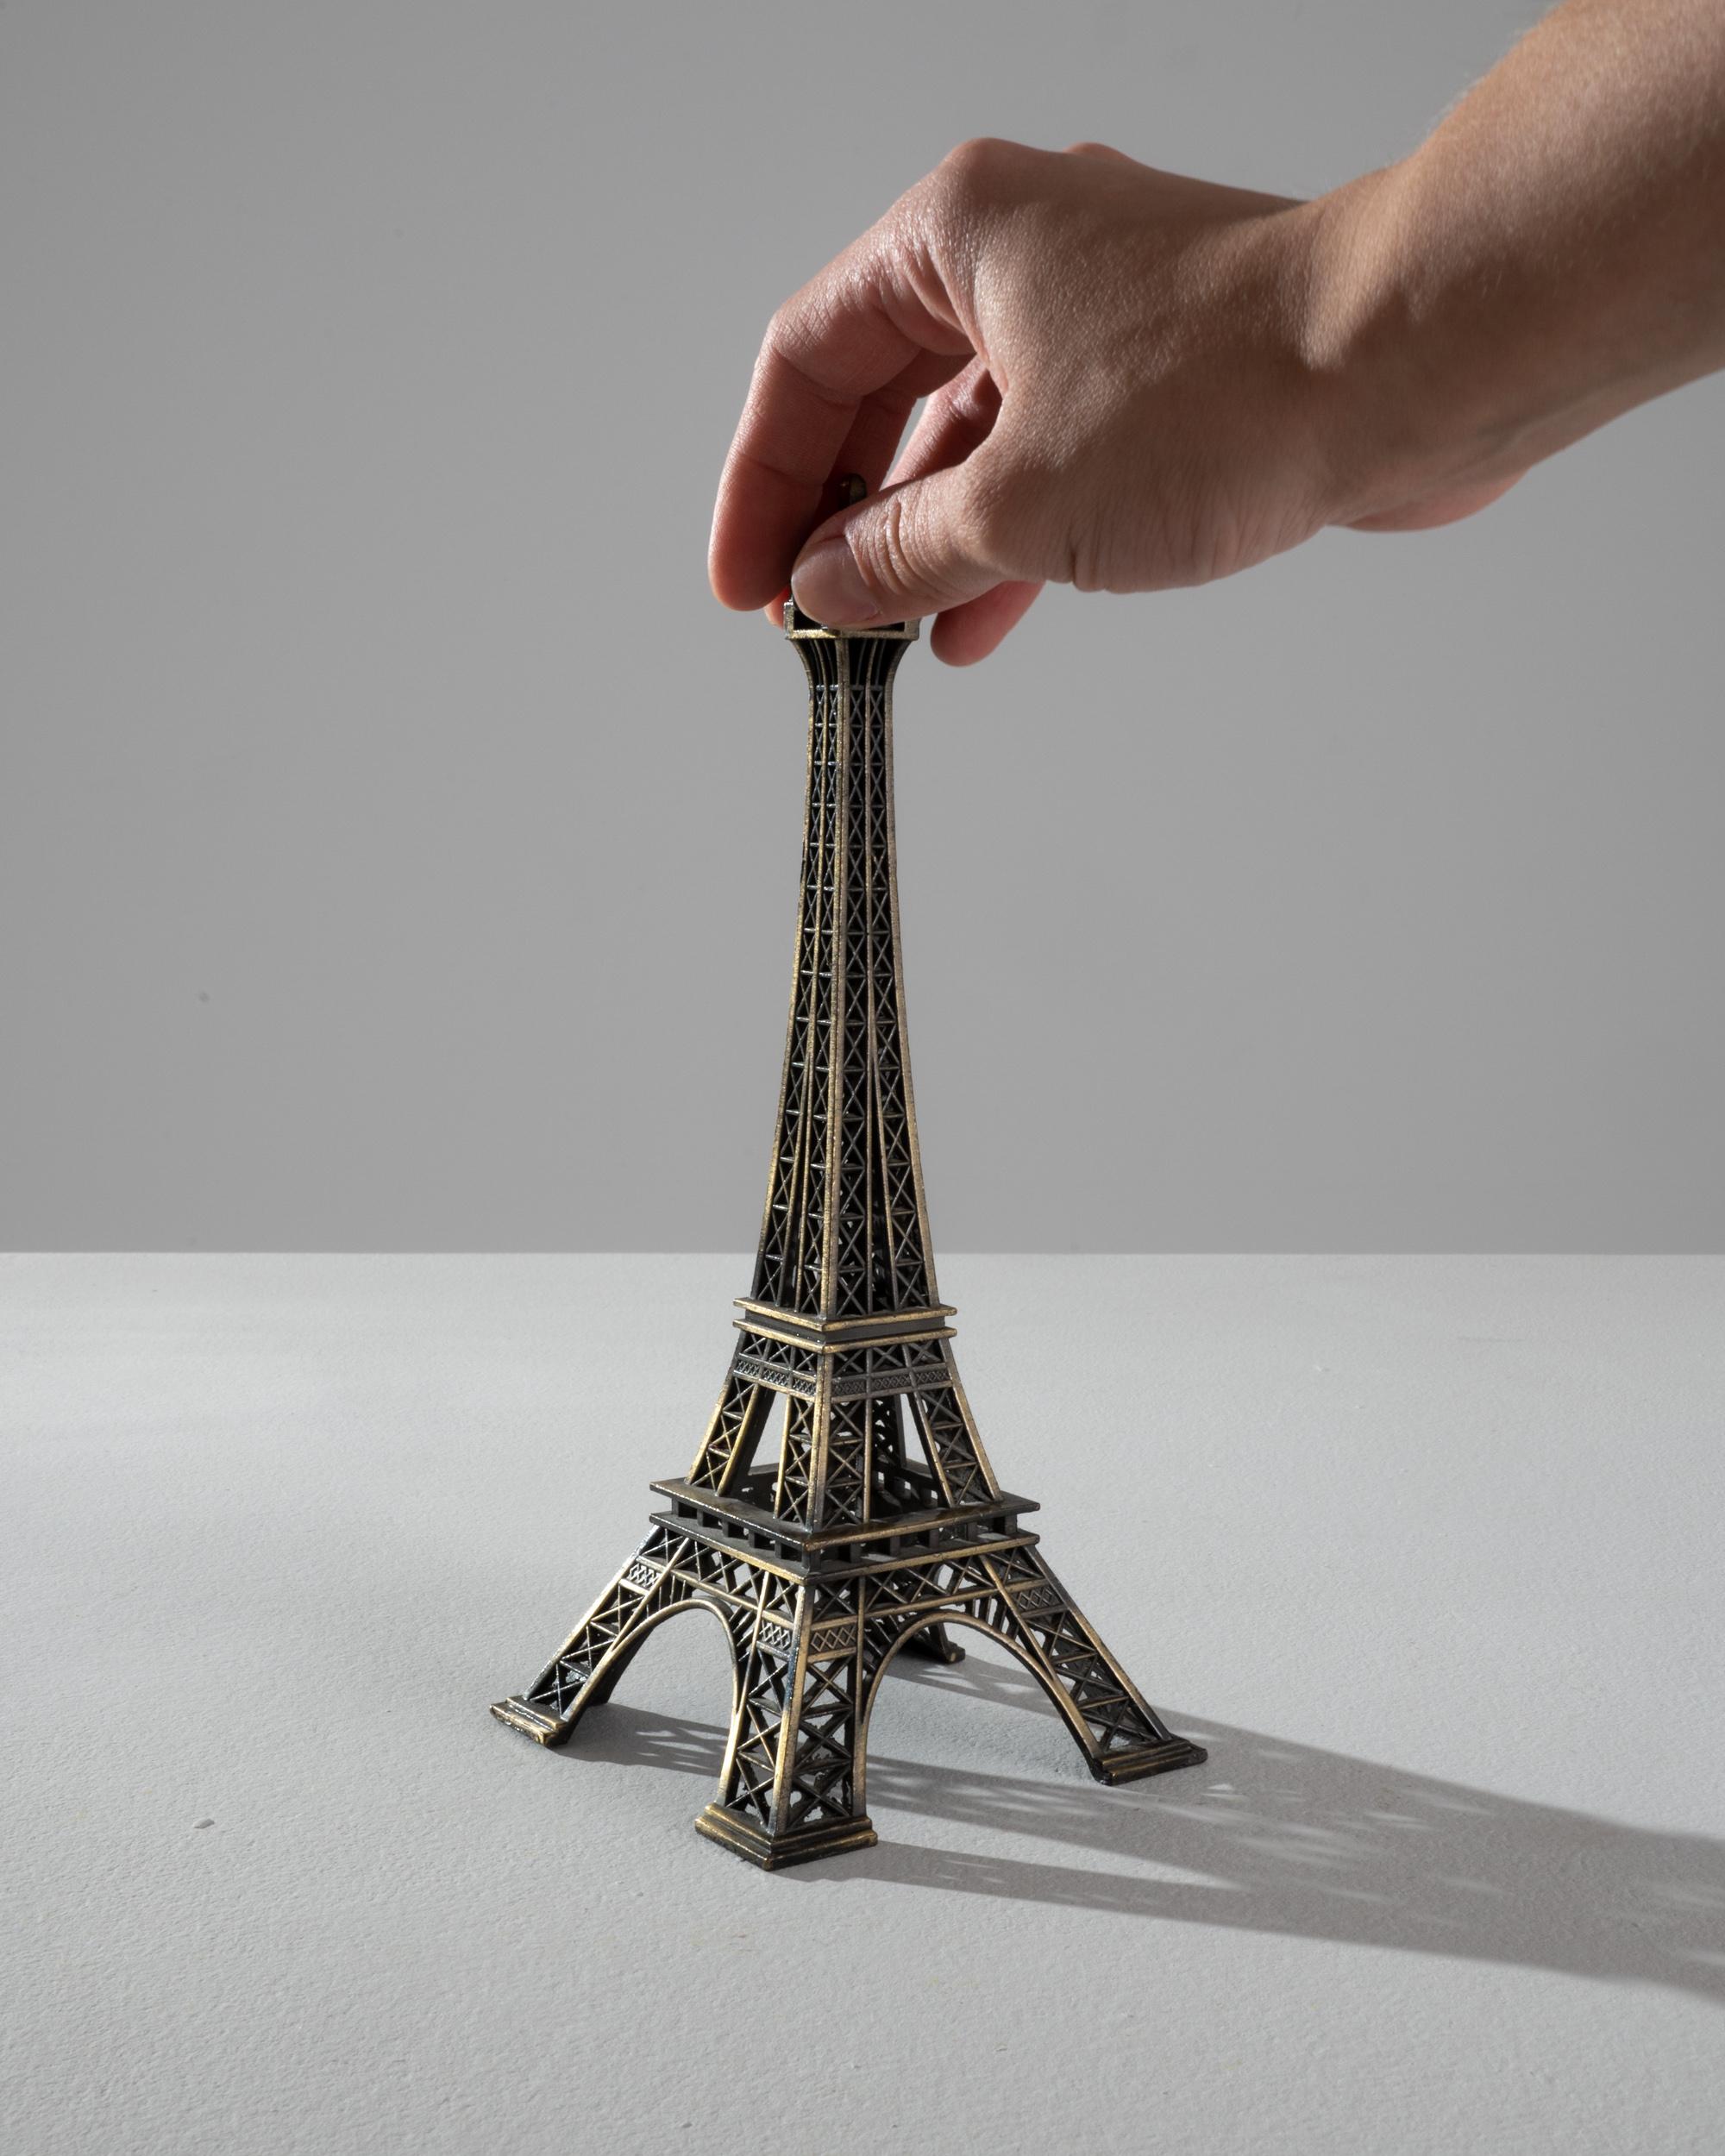 This brass decoration, in the shape of the Eiffel tower, conjures the romance of a voyage to Paris. Made in France in the 20th Century, the intricate lattice-work is rendered in perfect detail, bringing the iconic monument to life. The dark finish